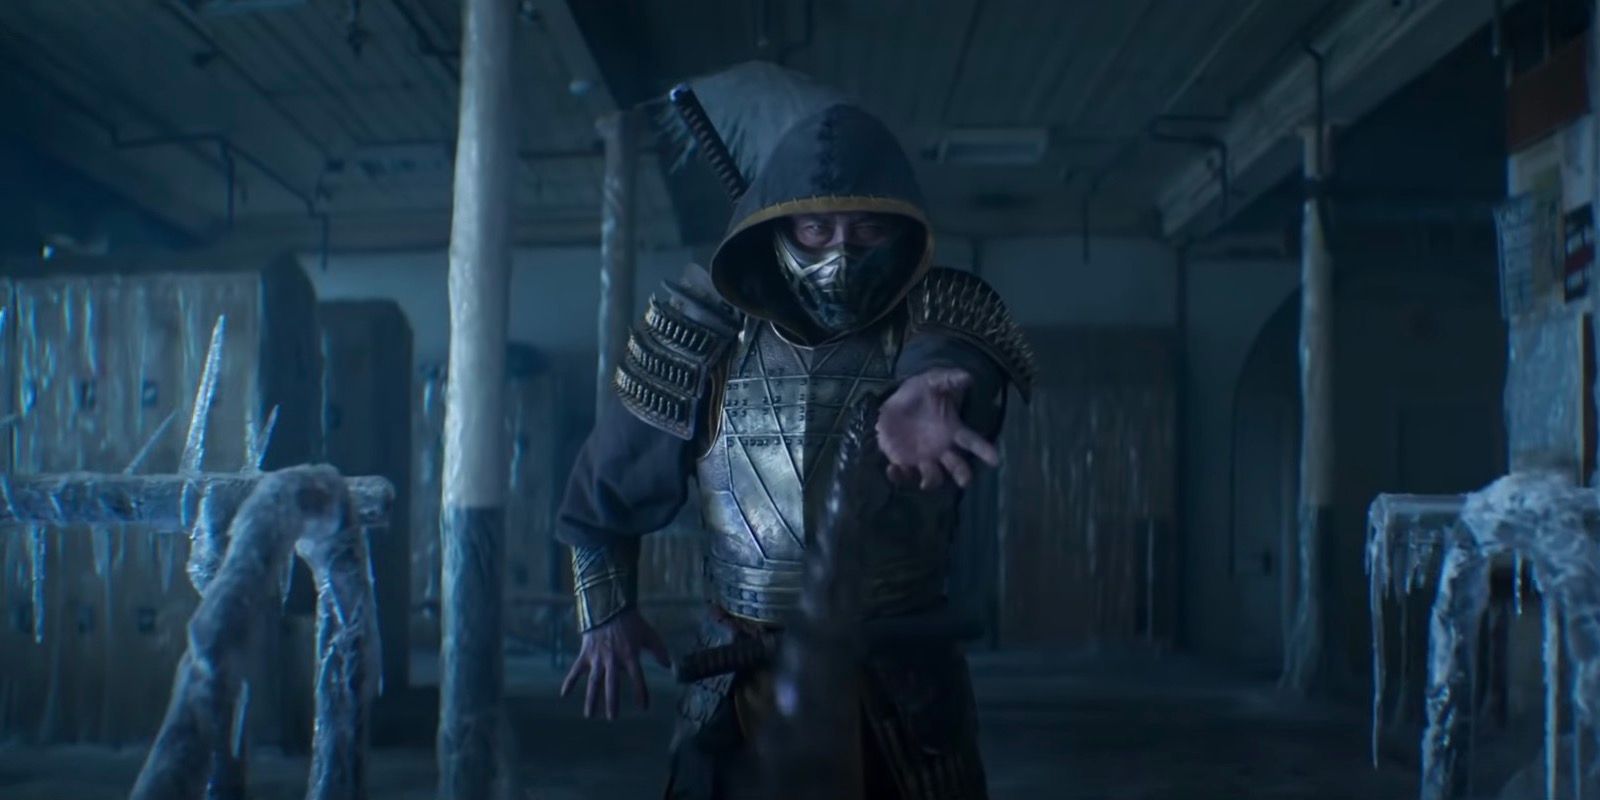 Mortal Kombat Trailer Is Here And It Looks Brutally Amazing (Fatalities